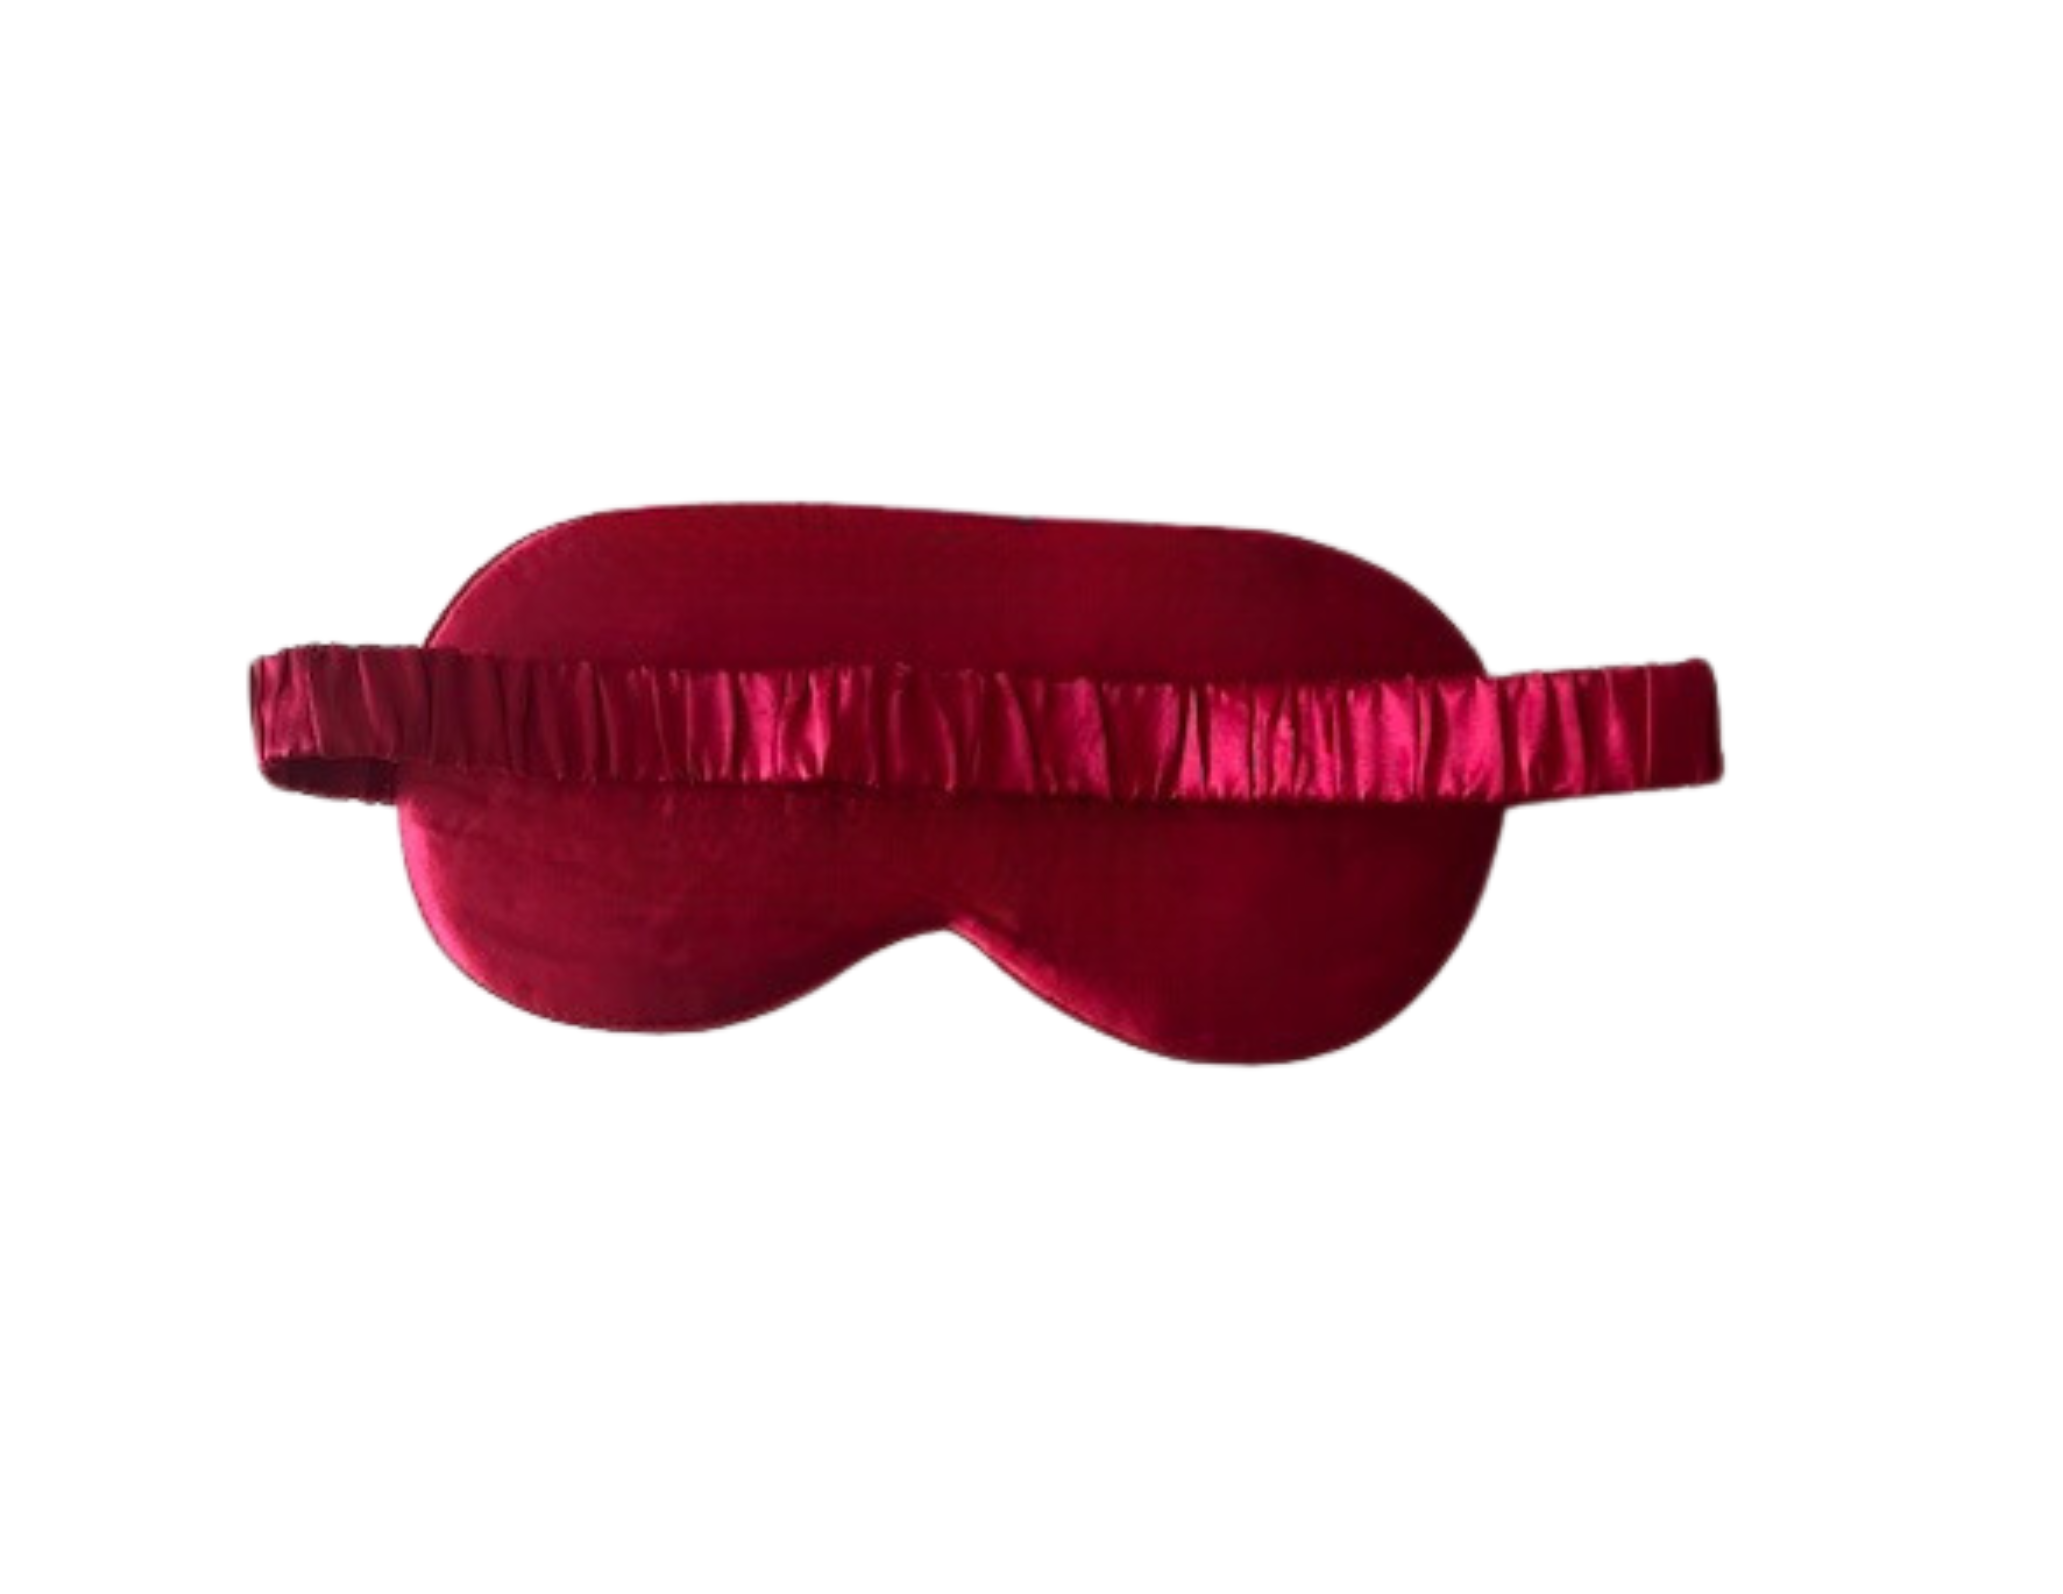  Wine Pure Silk Sleep Mask - Wine Pure Silk Sleep Mask -  -  - Luxurious Fine Silk by Forsters Finery